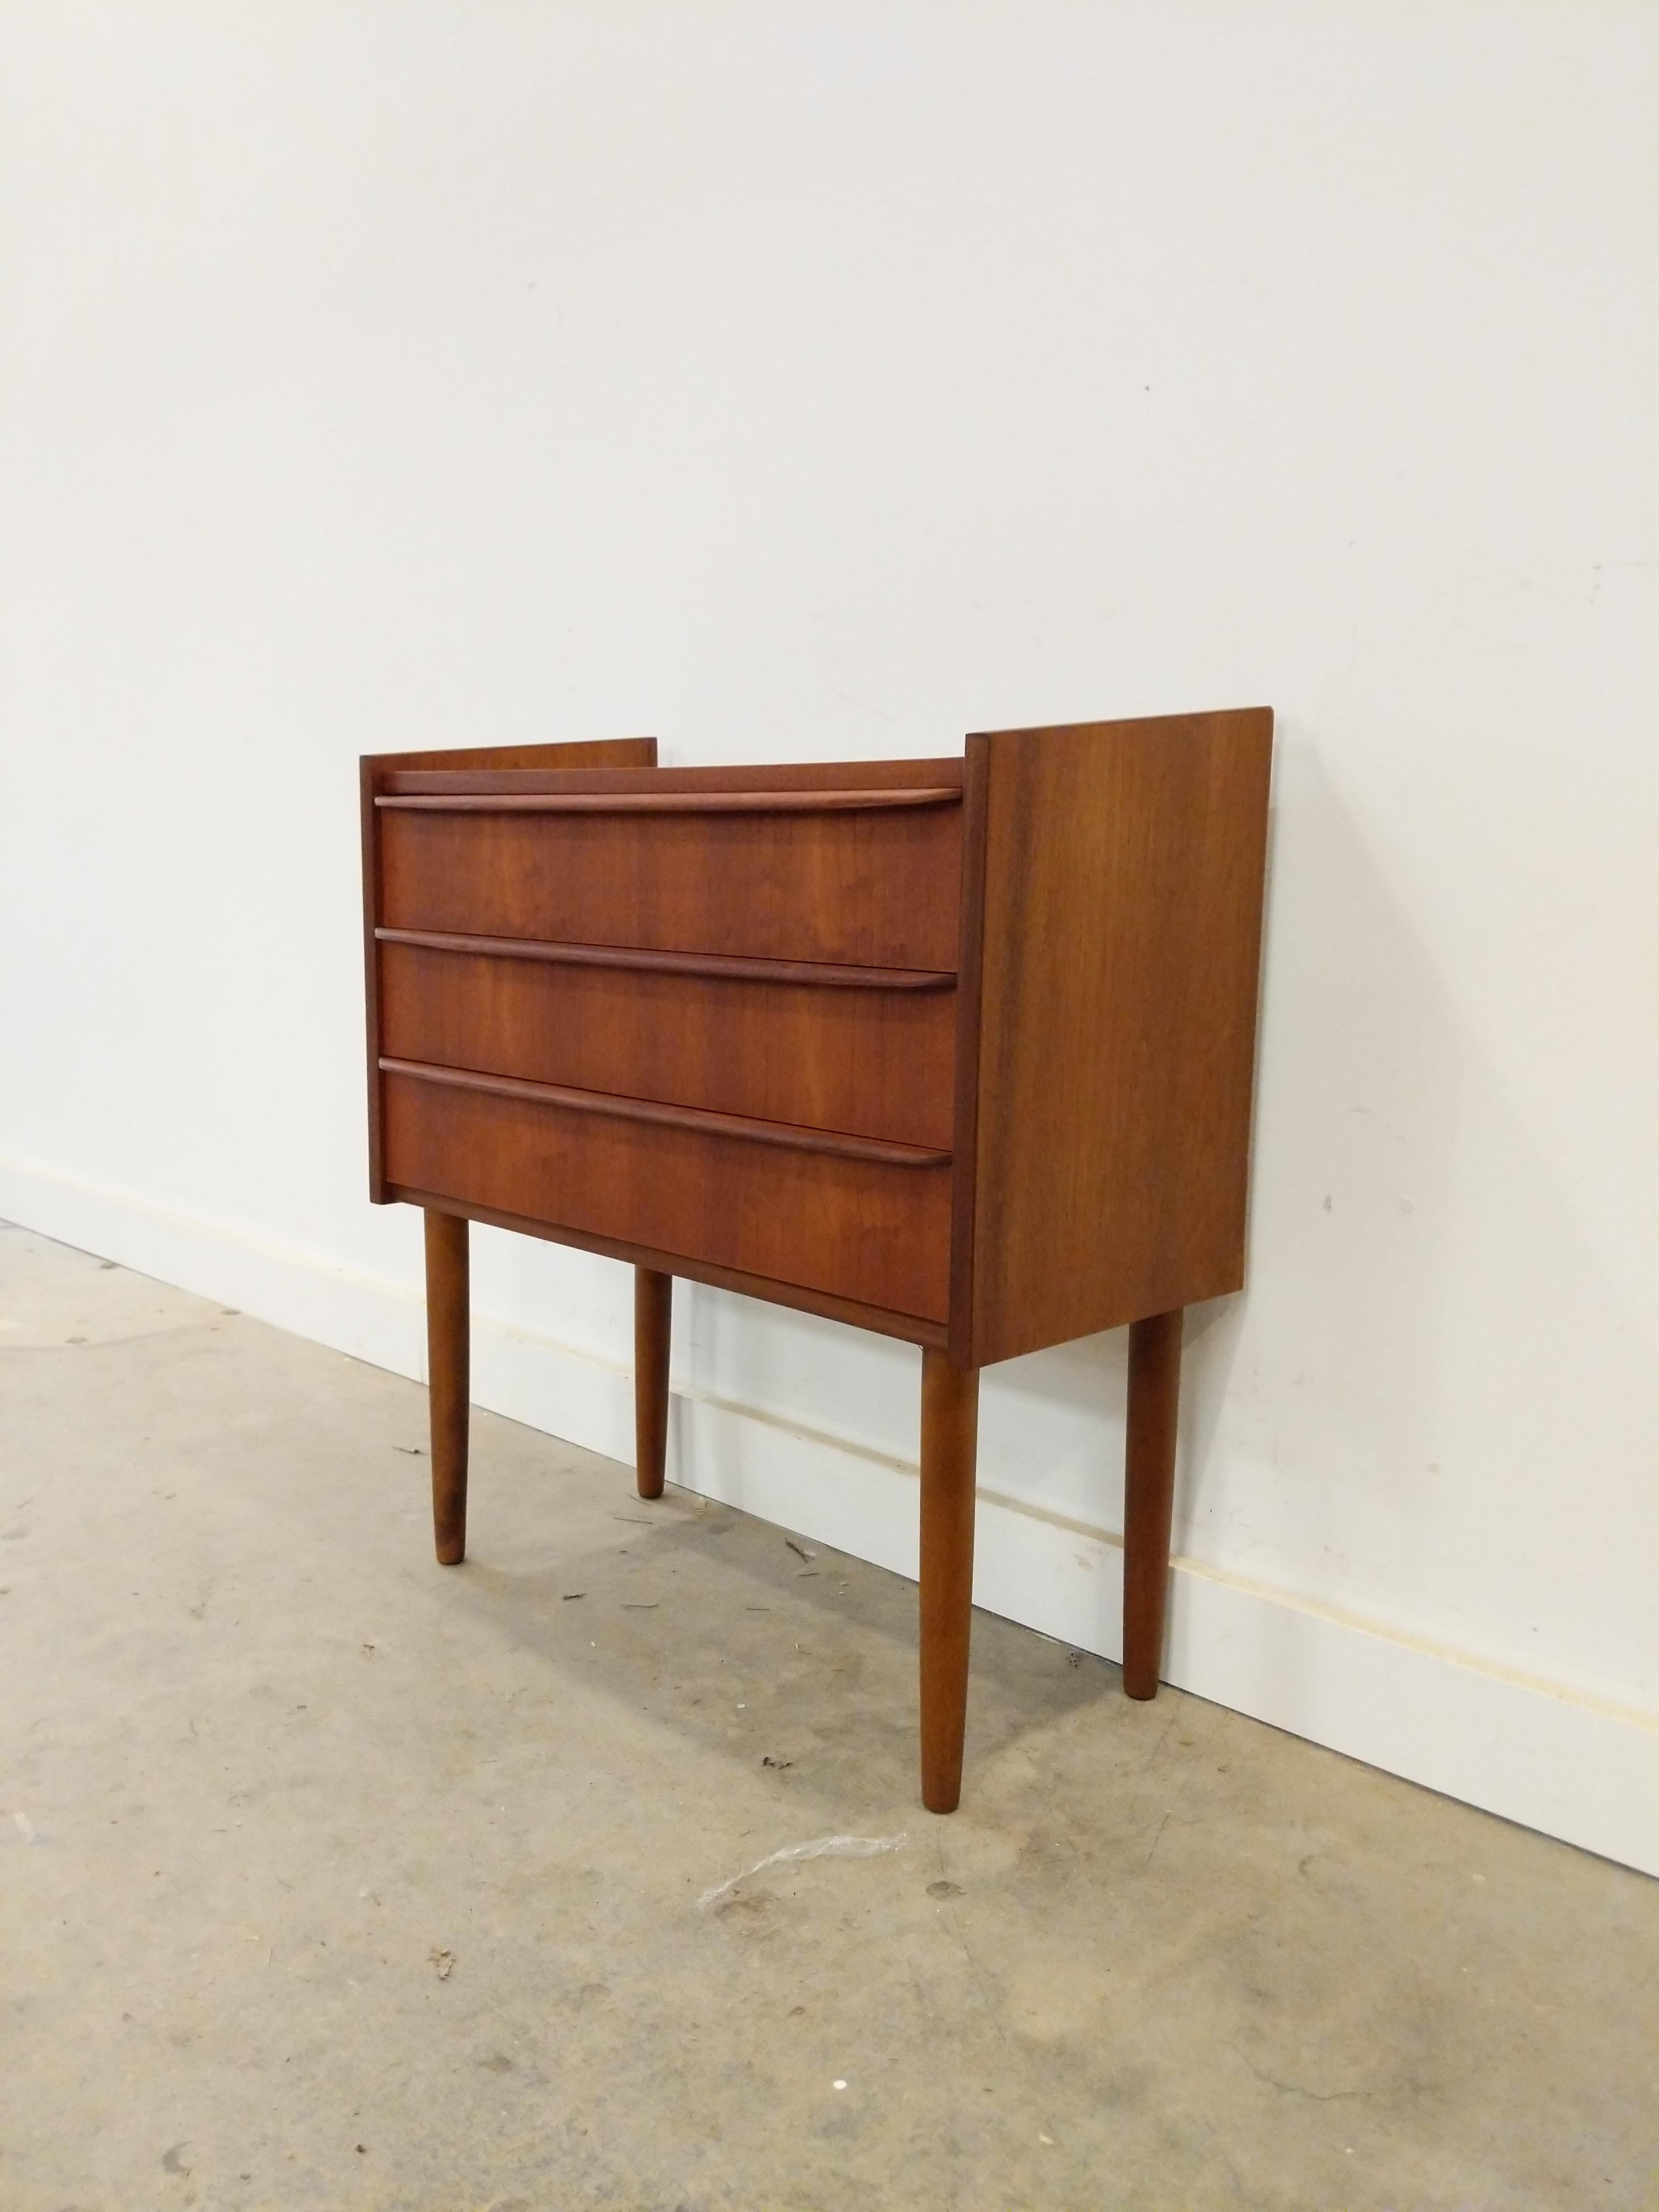 Authentic vintage mid century Danish / Scandinavian Modern teak nightstand / low chest of drawers.

This piece is in excellent refinished condition with very few signs of age-related wear (see photos).

If you would like any additional details,